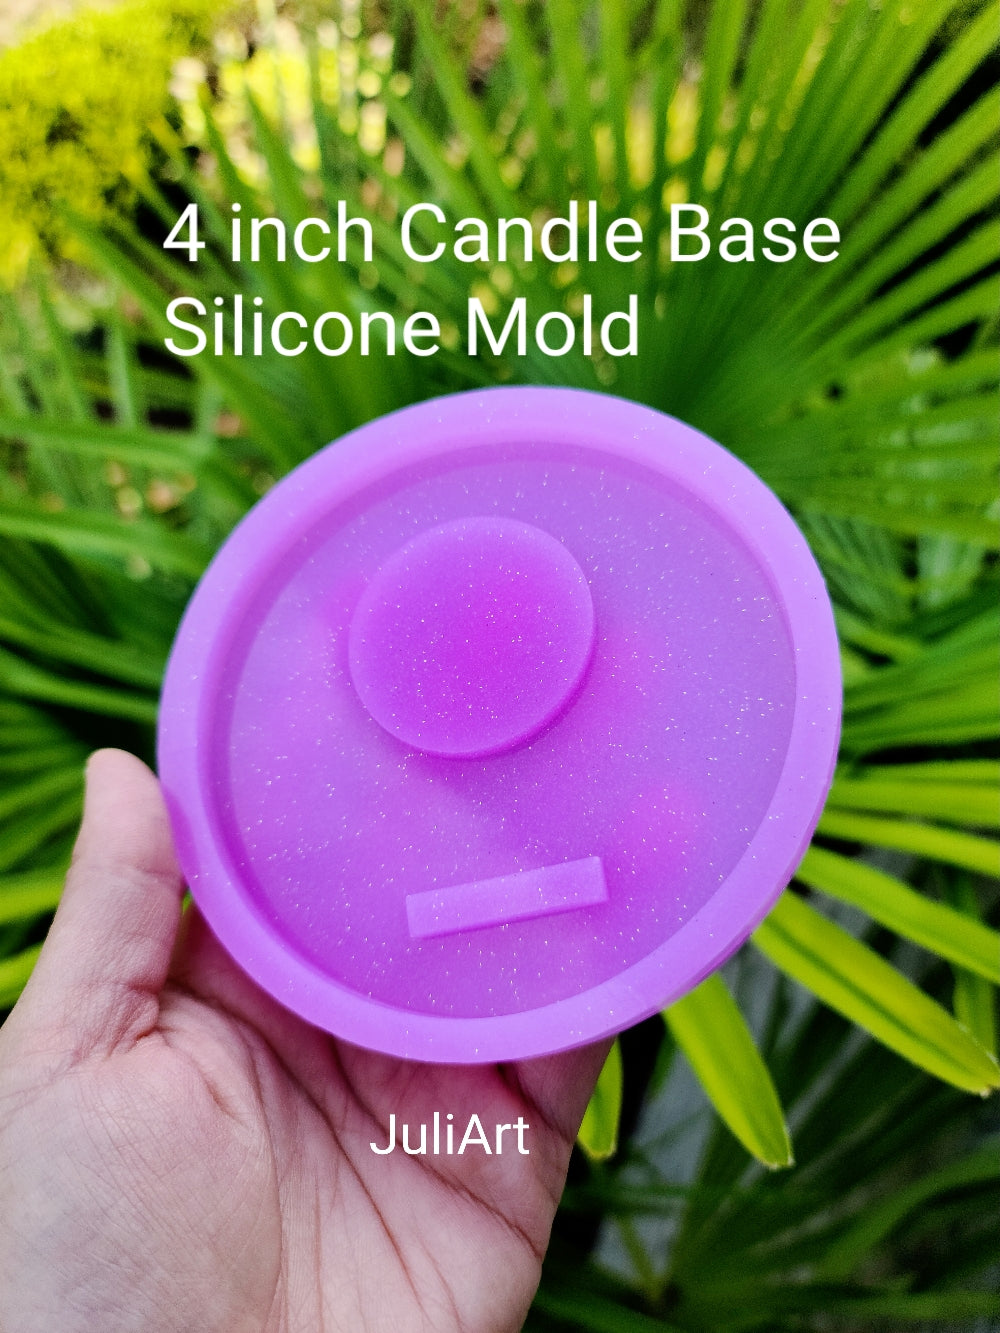 4 inch Candle Base Silicone Mold for Resin Casting